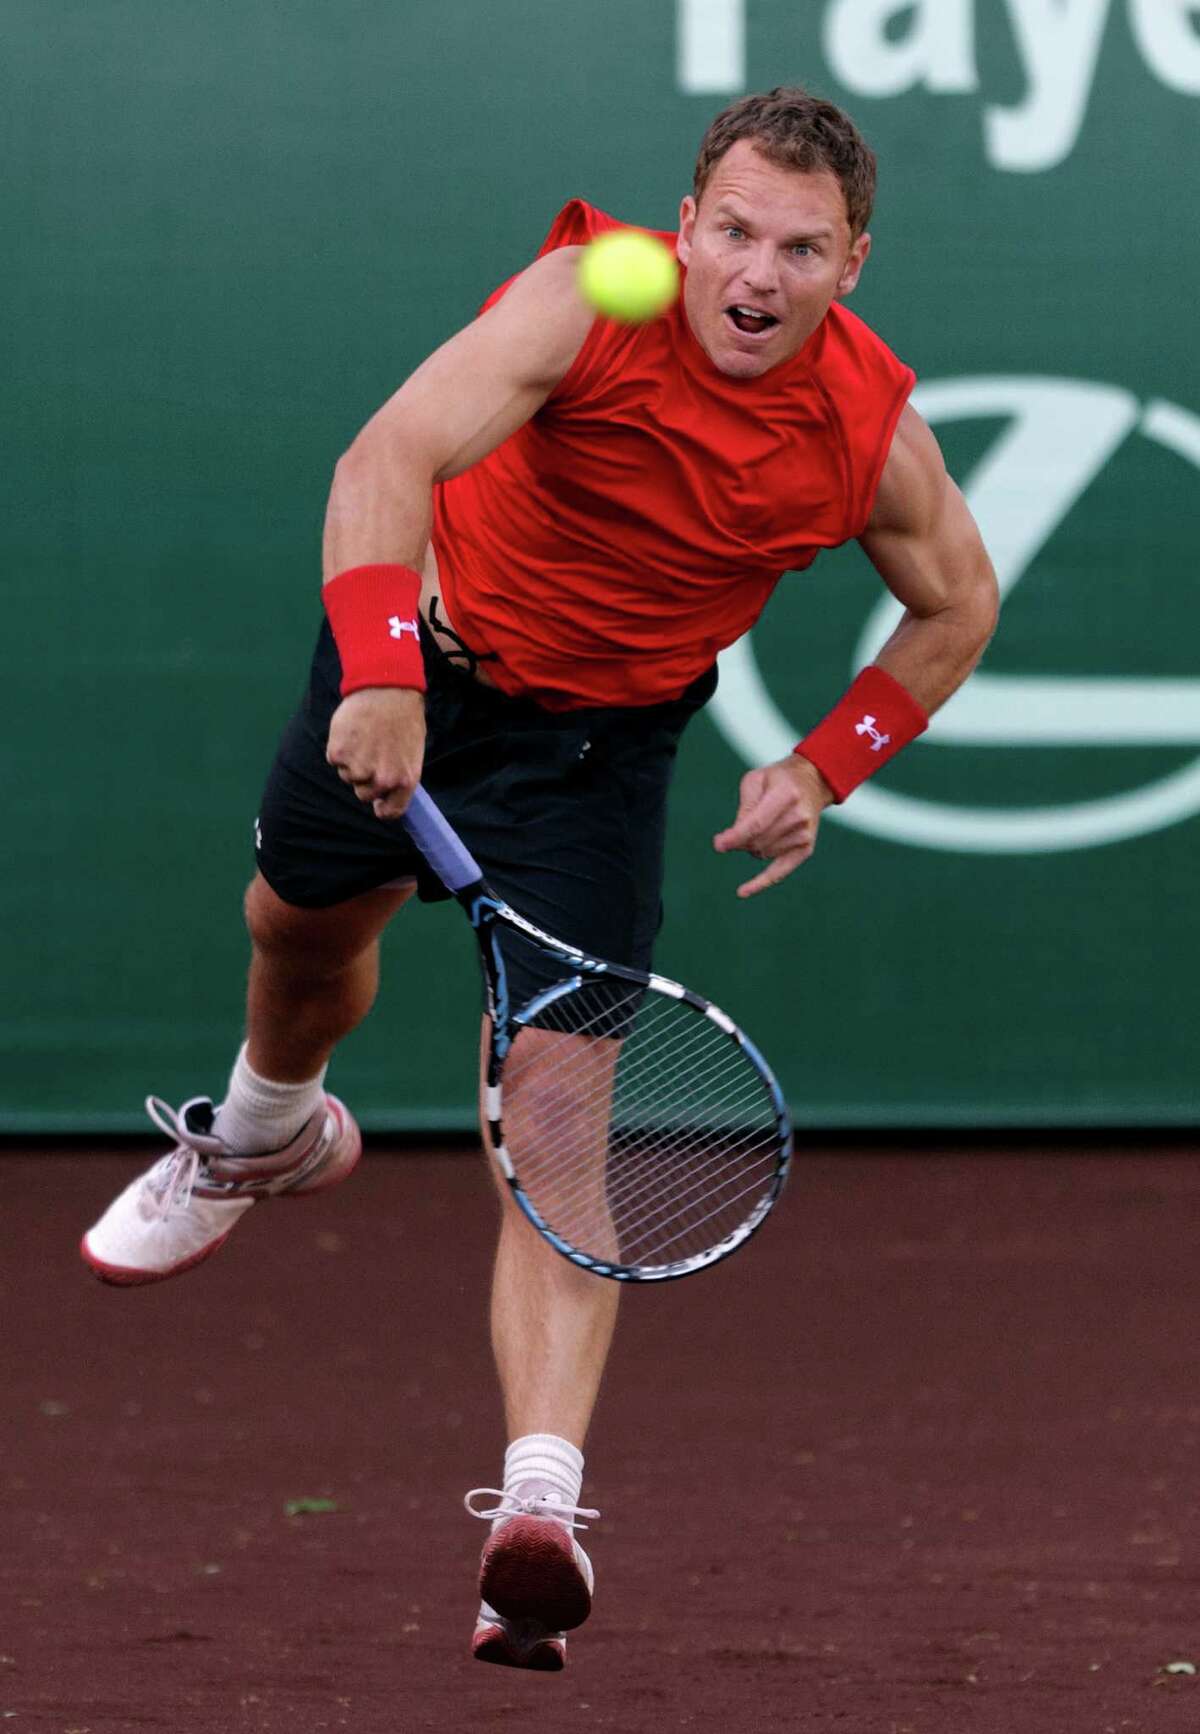 Michael Russell serves to Igor Andreev in the first set during a US Mens Clay Court match on Monday, April 4, 2011 in Houston. Andreev won 6-2, 6-3.